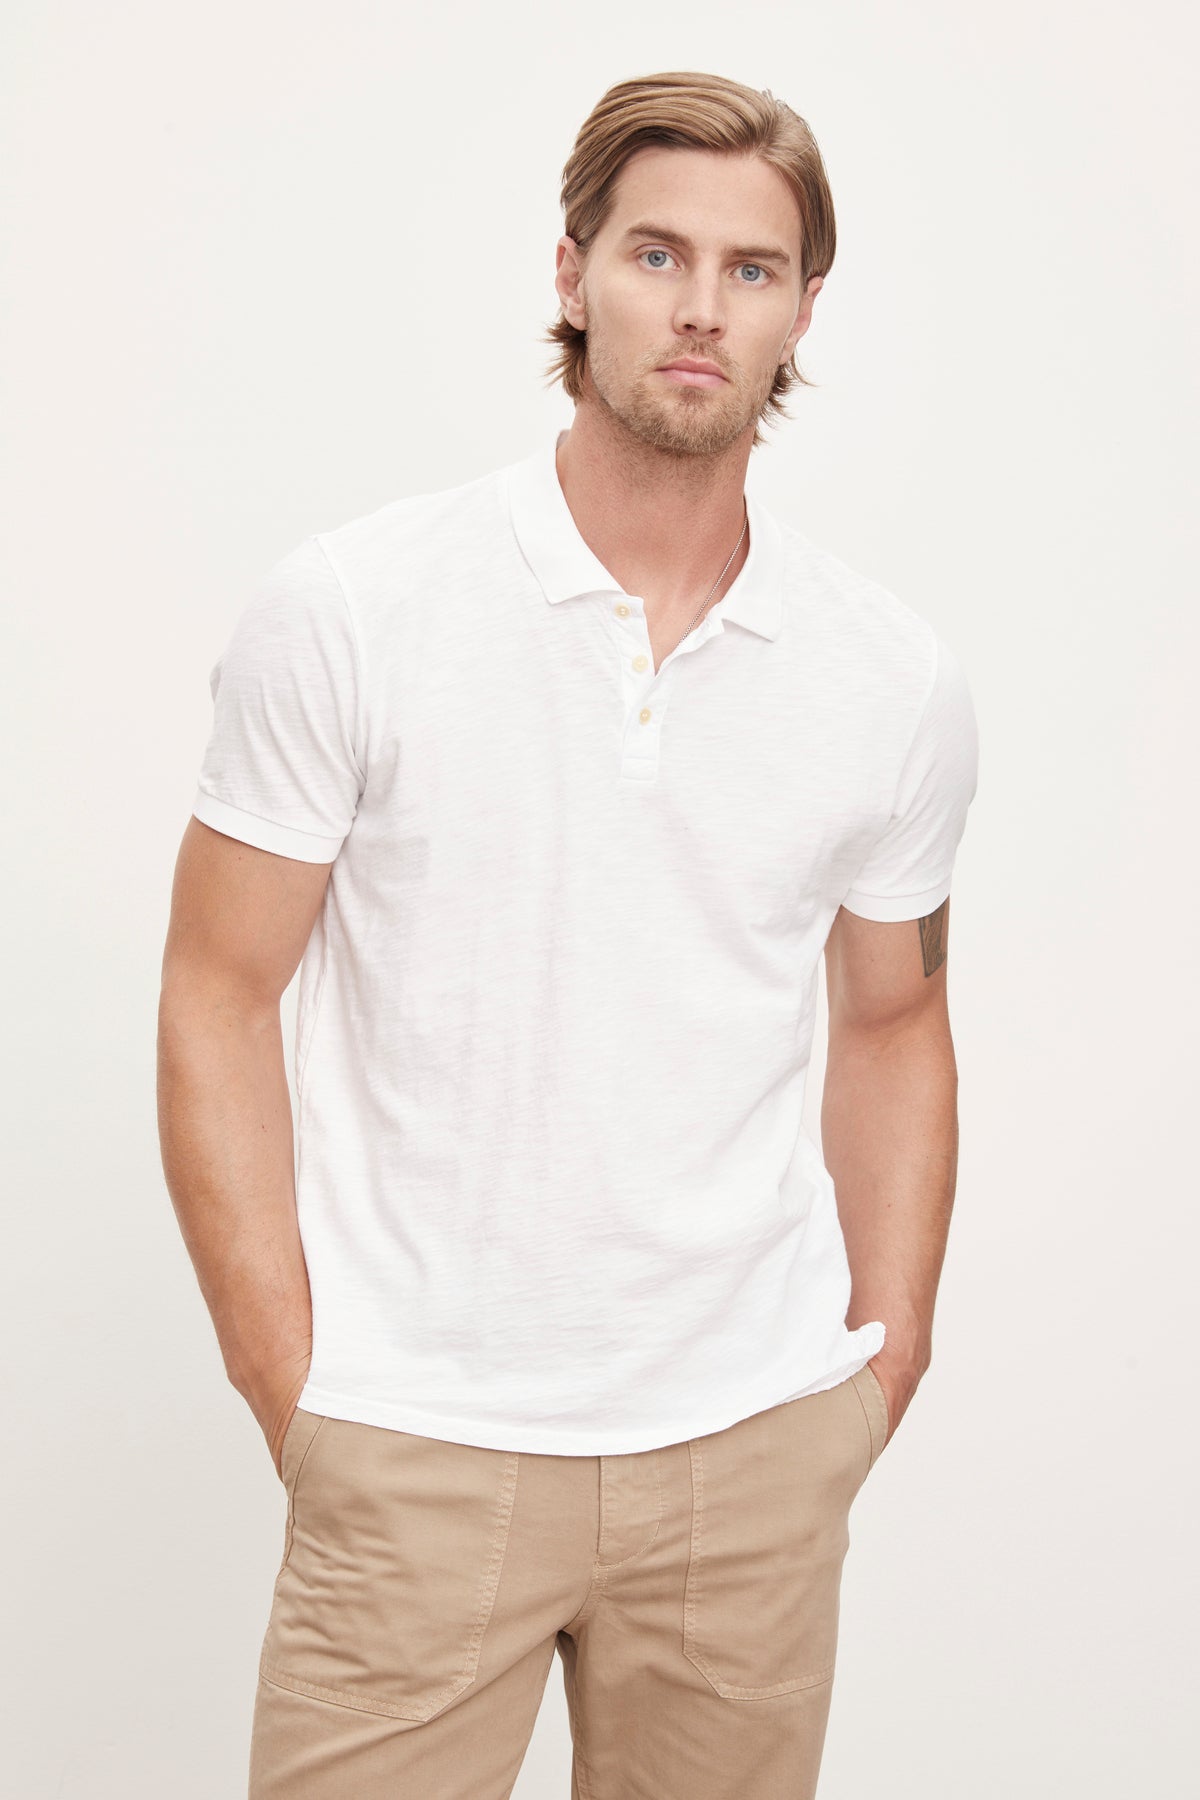   The model is wearing a white NIKO POLO shirt by Velvet by Graham & Spencer with a vintage-feel. 